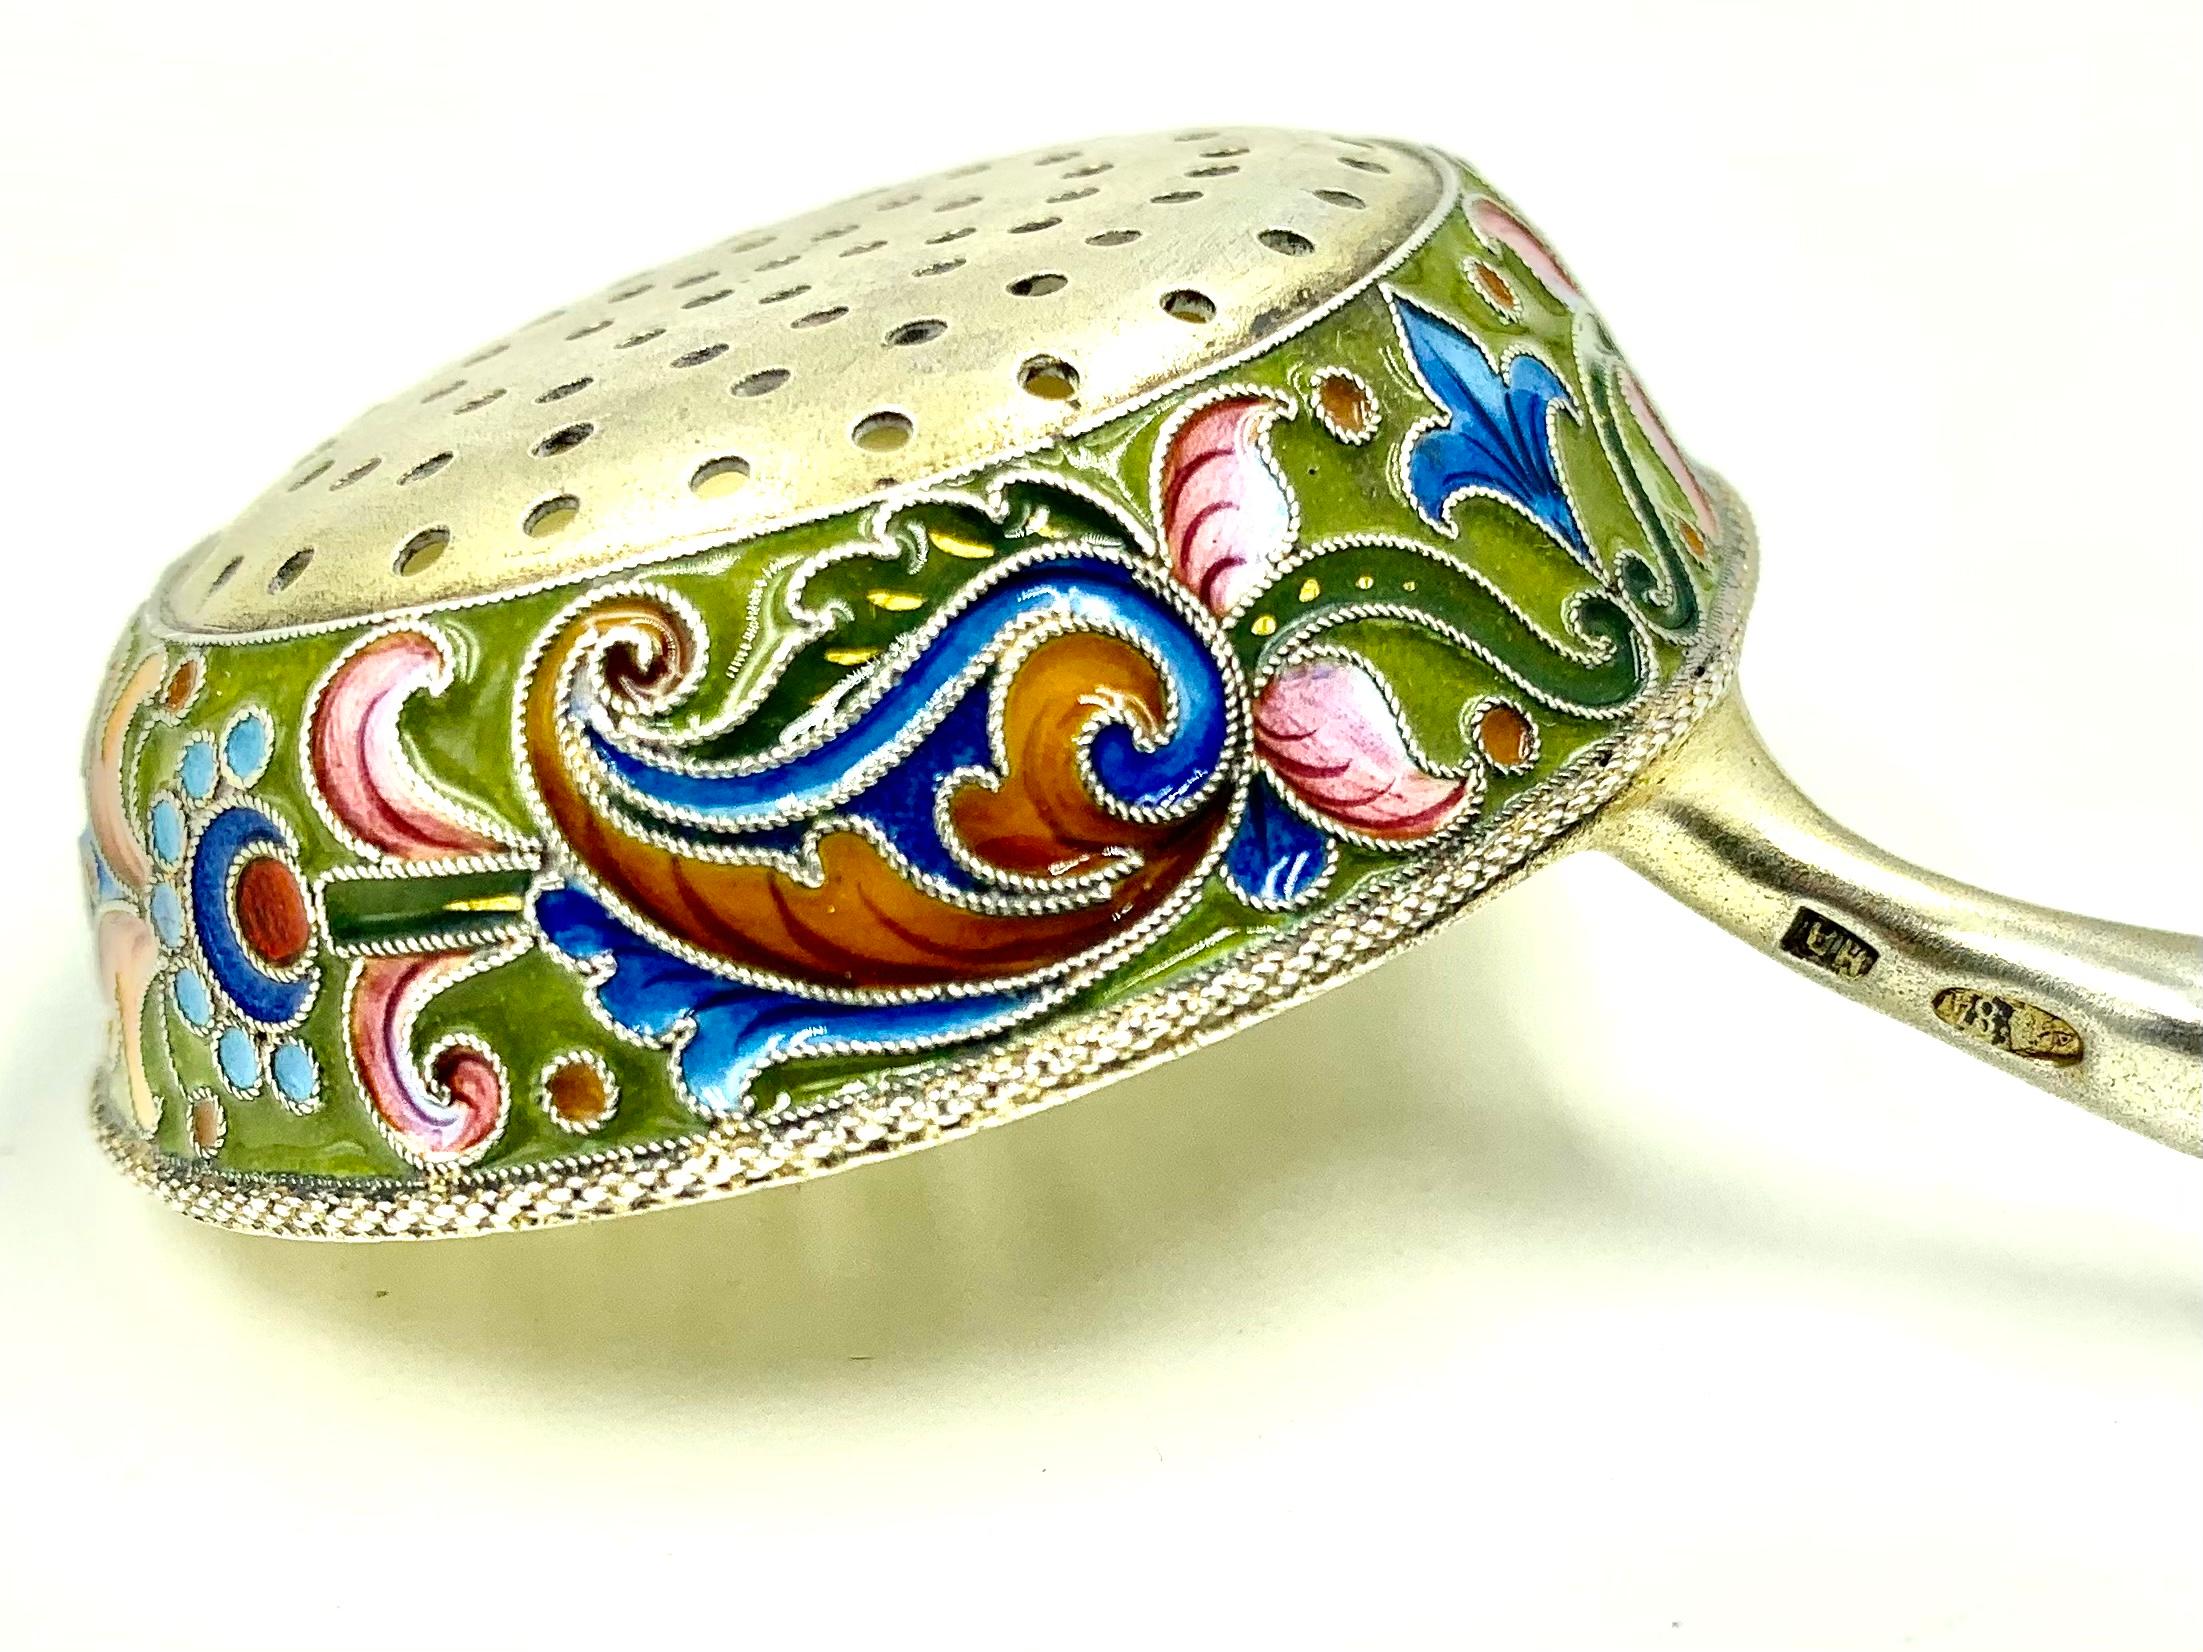 Exceptional quality antique Russian vermeil silver and shaded enamel Pan-Slavic Style tea strainer by Nikolai Alekseyev. The handle decorated in dove grey background with exotic floral motifs executed in pink, lavender, puce, orange and peach shaded